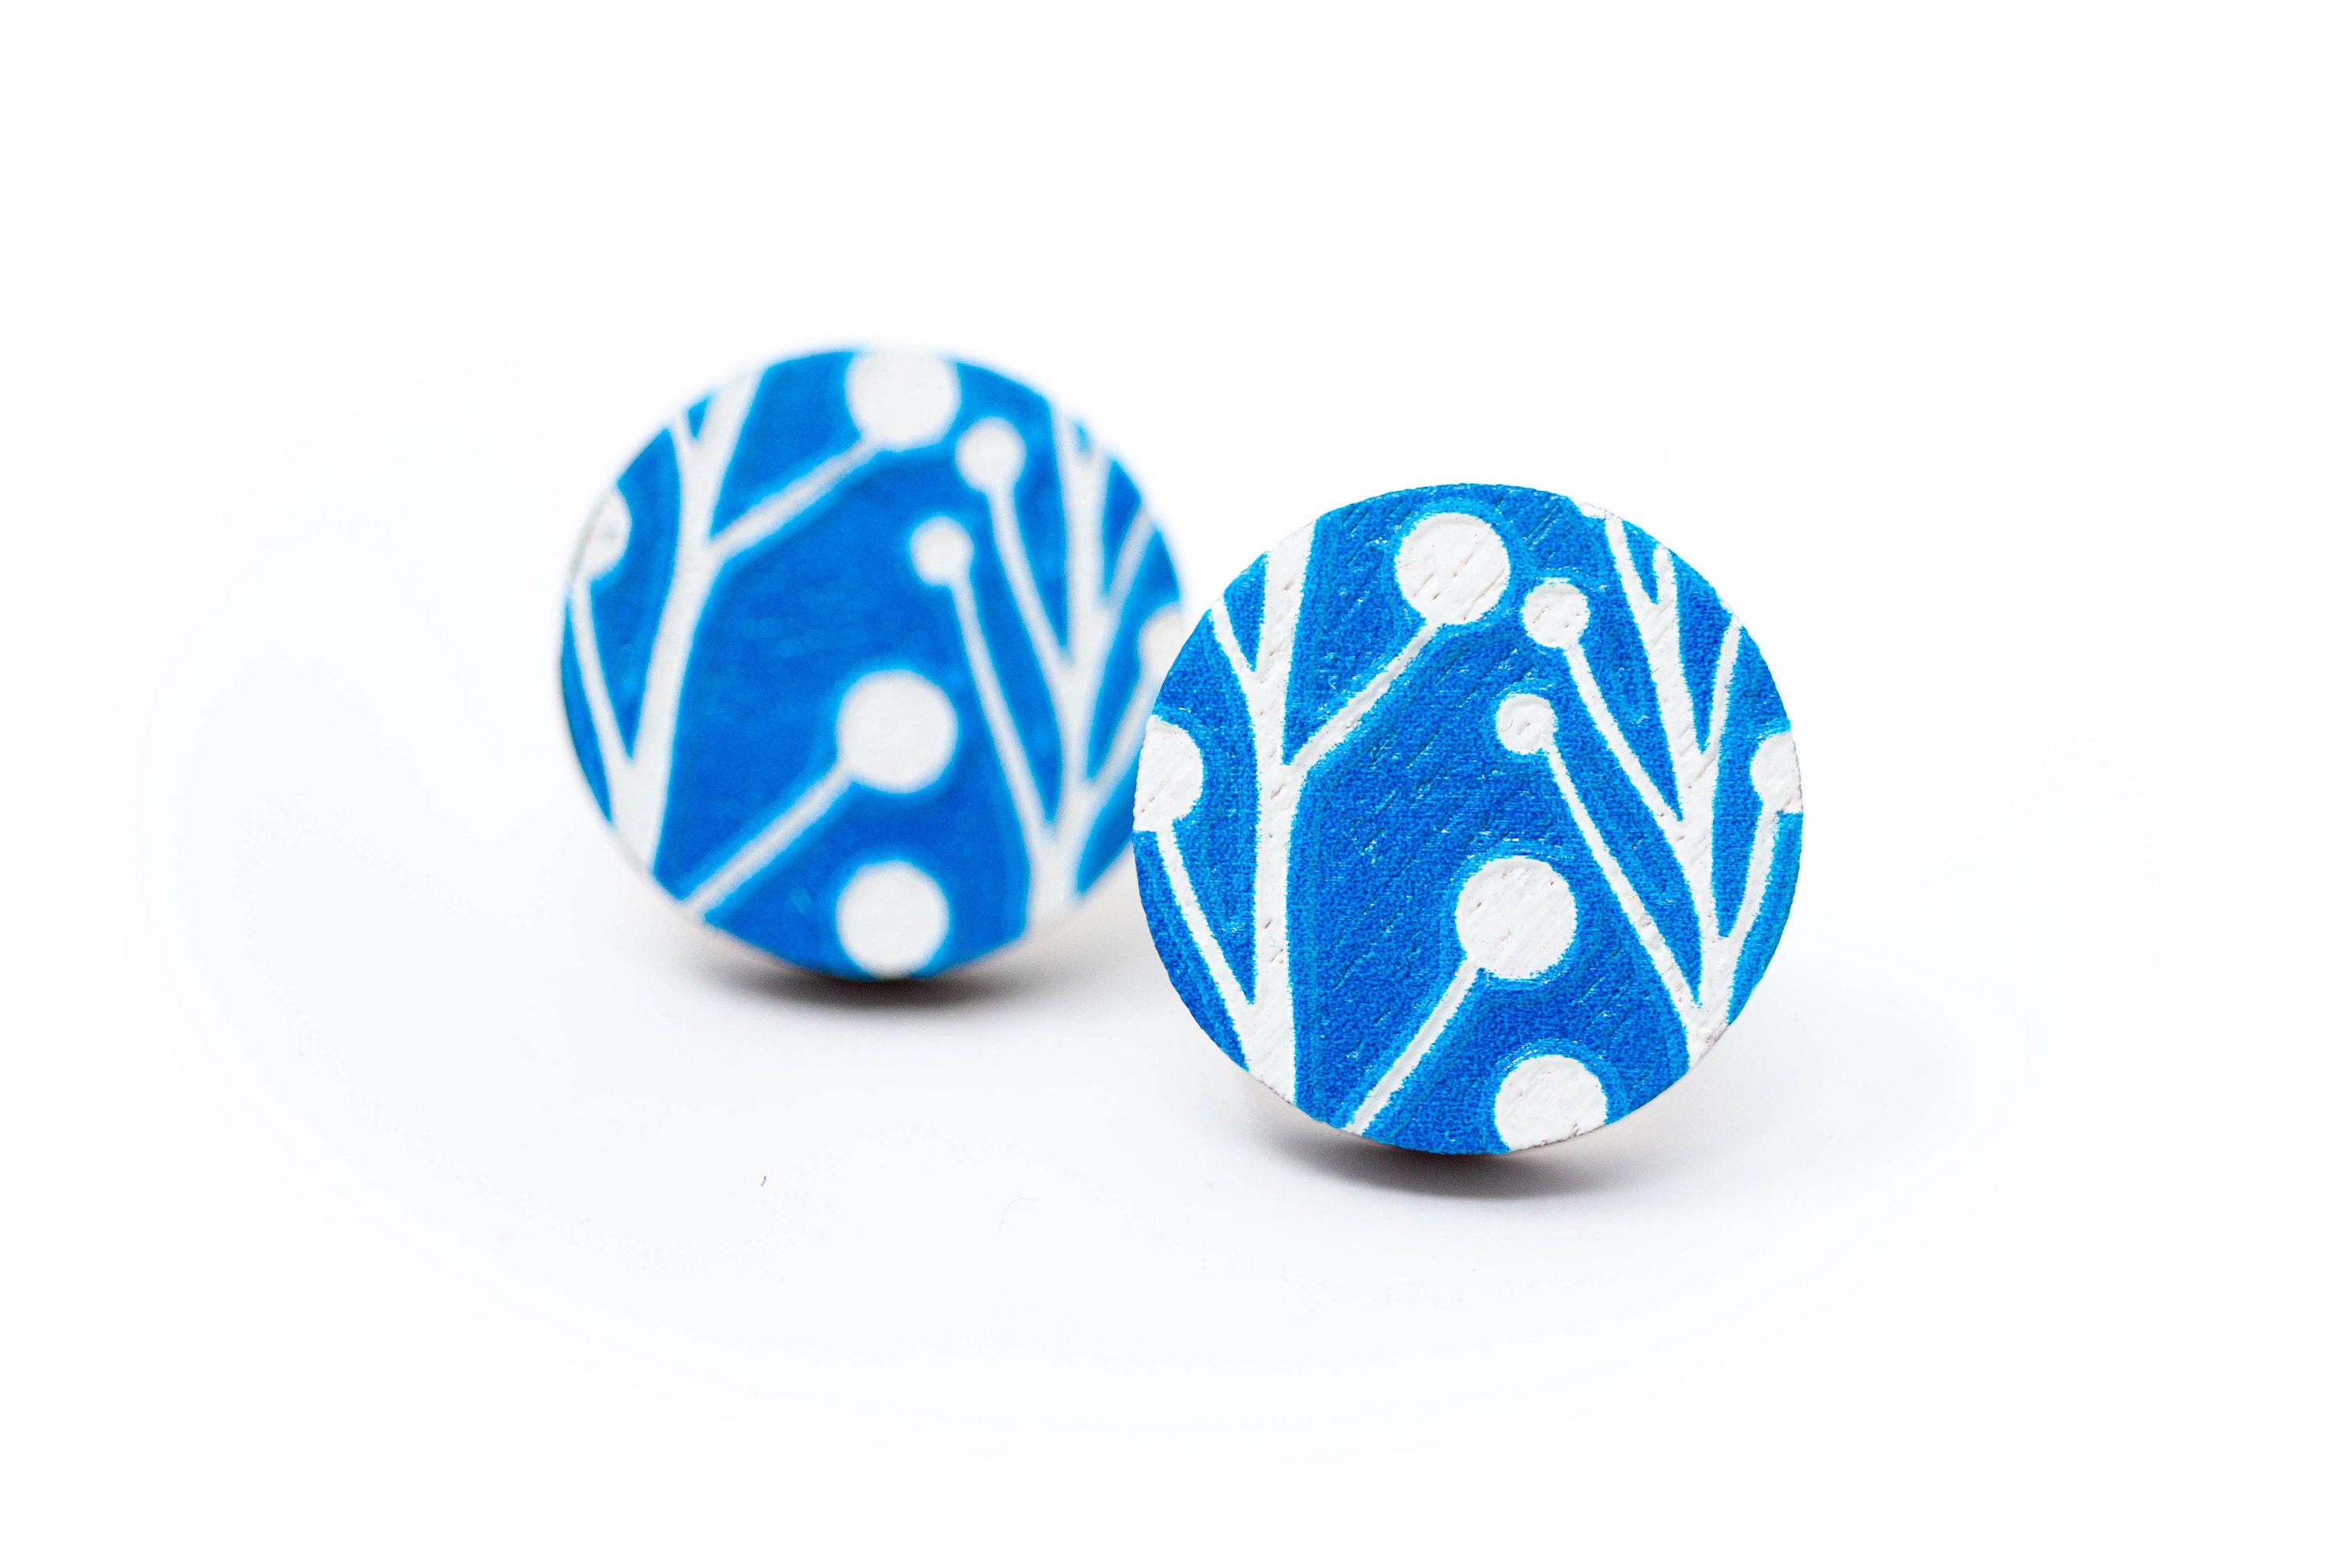 Mango Nature Lover Round earring Small Stud Hypoallergenic Blue Handcrafted Sustainable Gift Reclaimed Wood Handmade